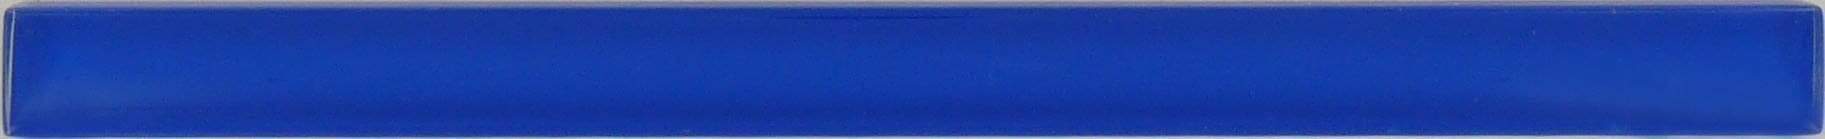 Royal Blue 5/8" x 8" Glossy Glass Liner Millenium Products